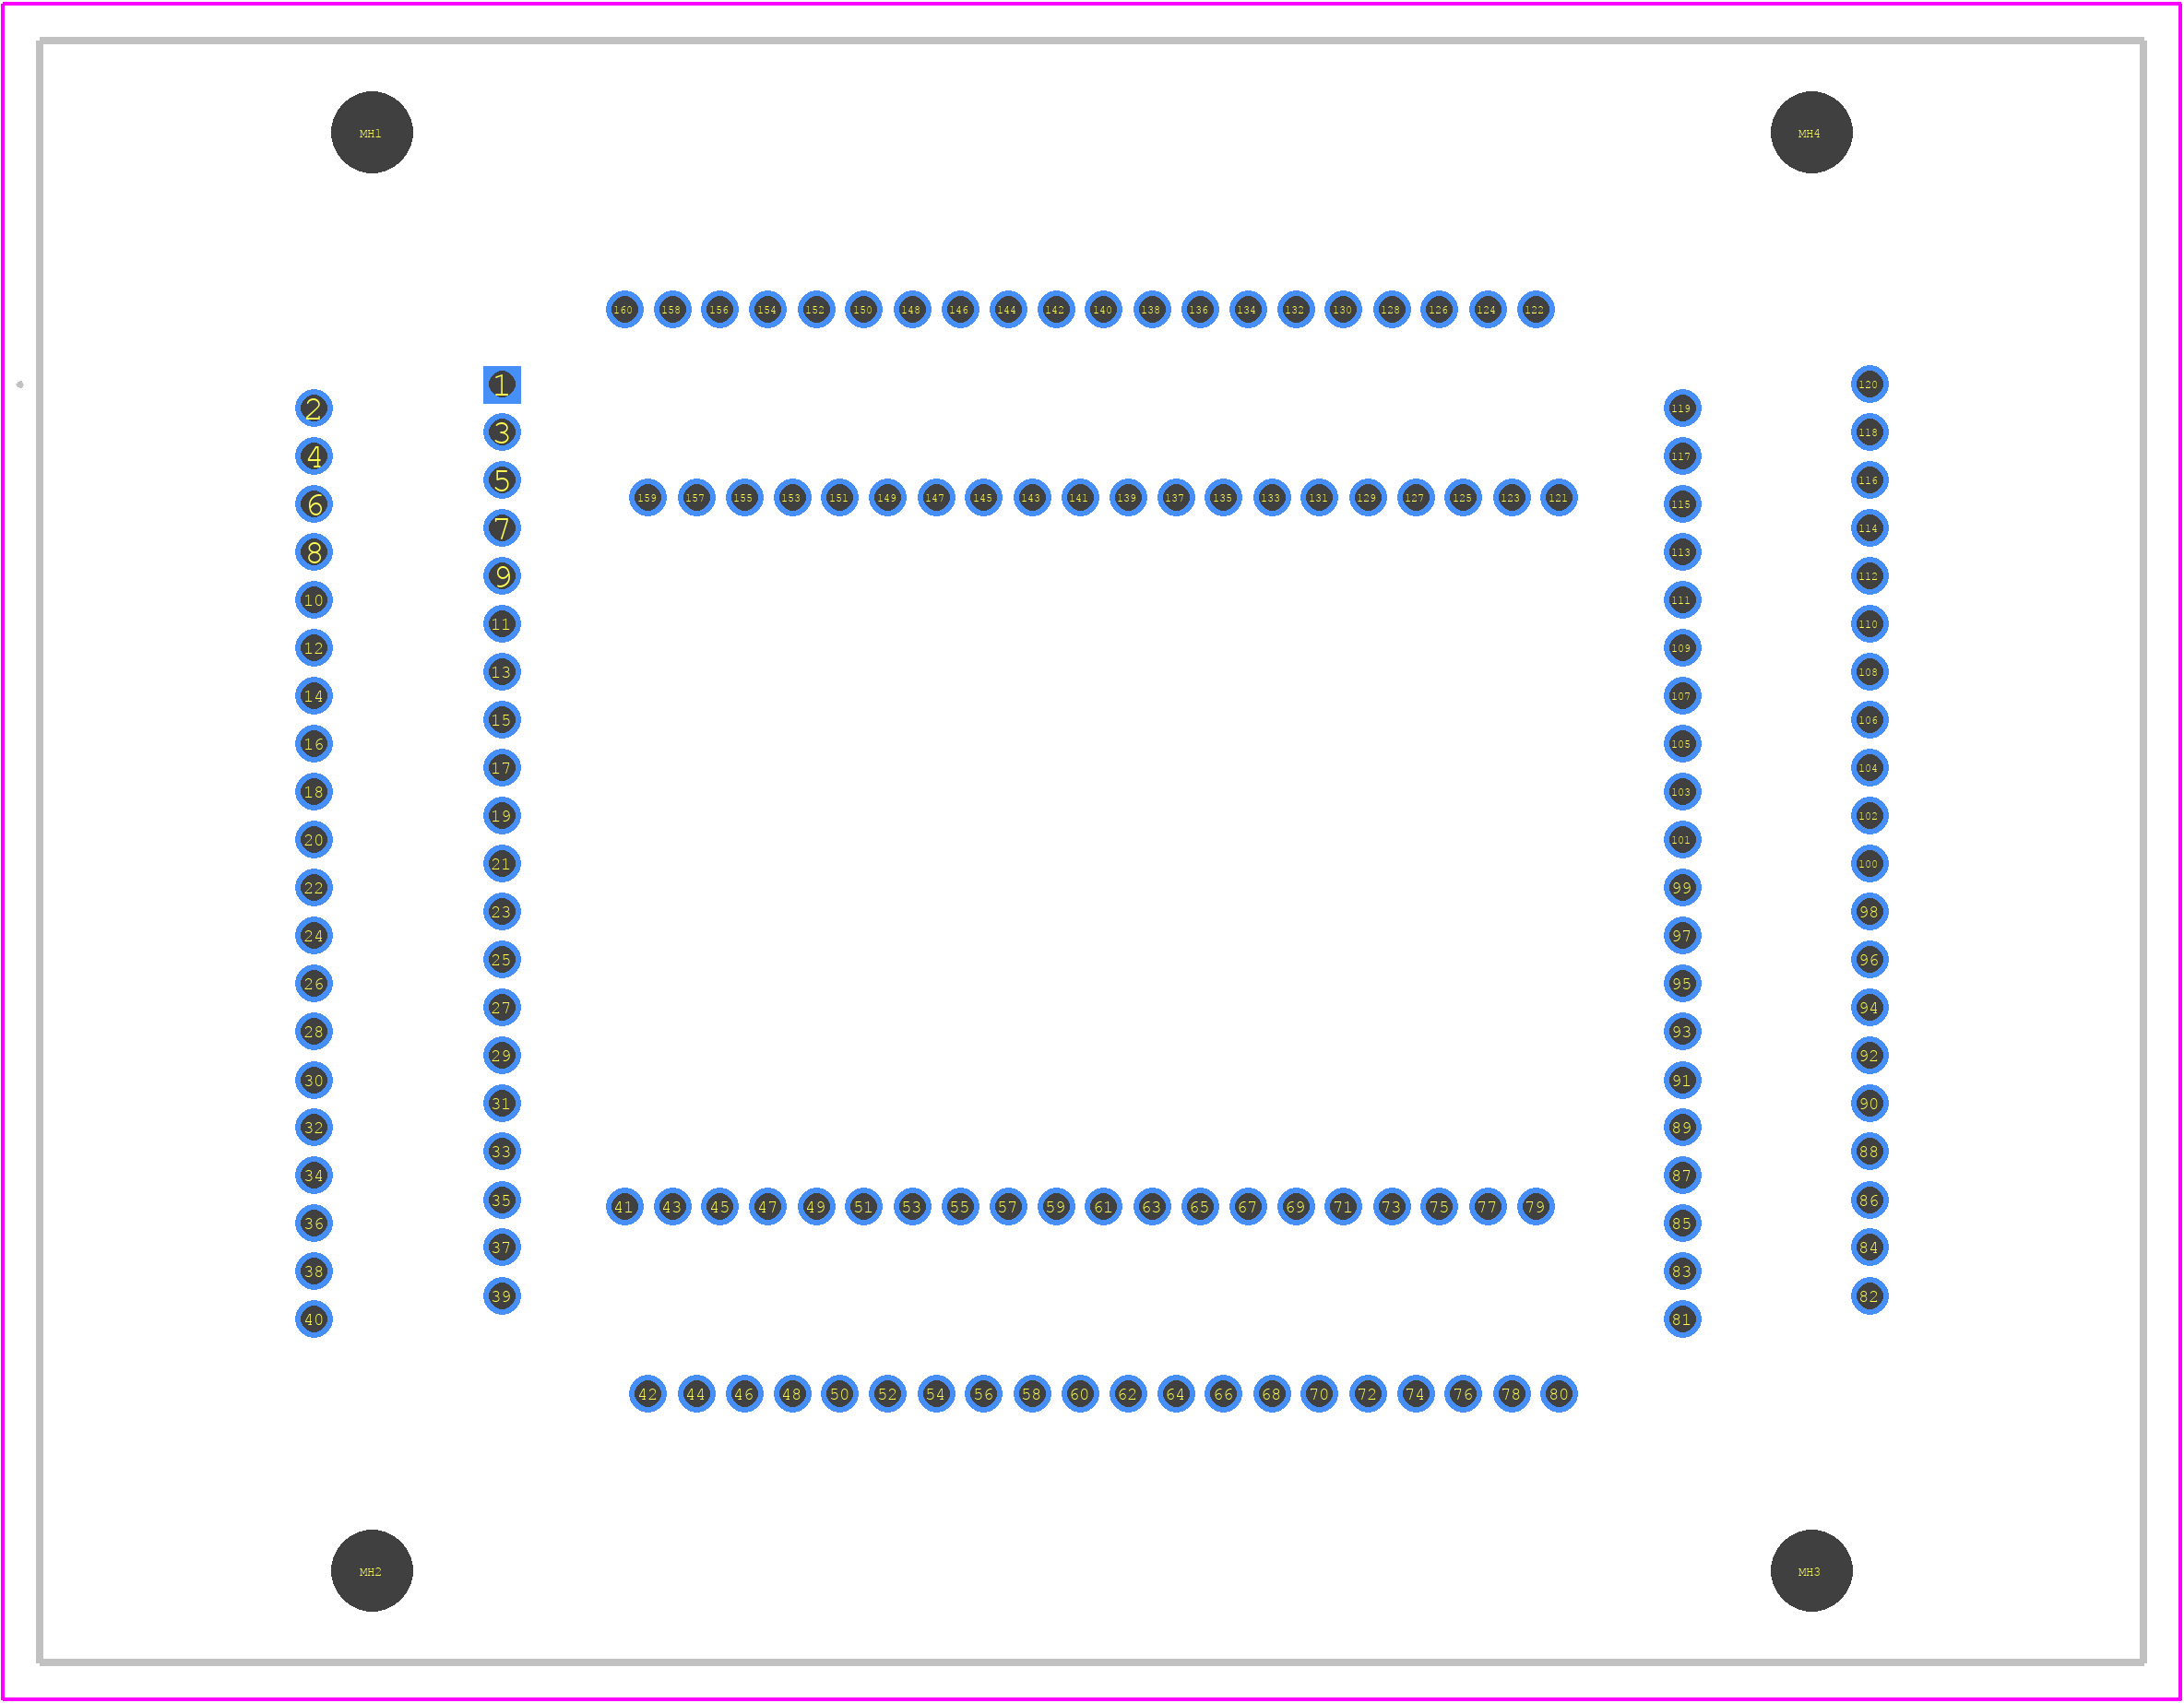 IC51-1604-845-1 - Yamaichi PCB footprint - Other - Other - IC51-1604-845-1-2